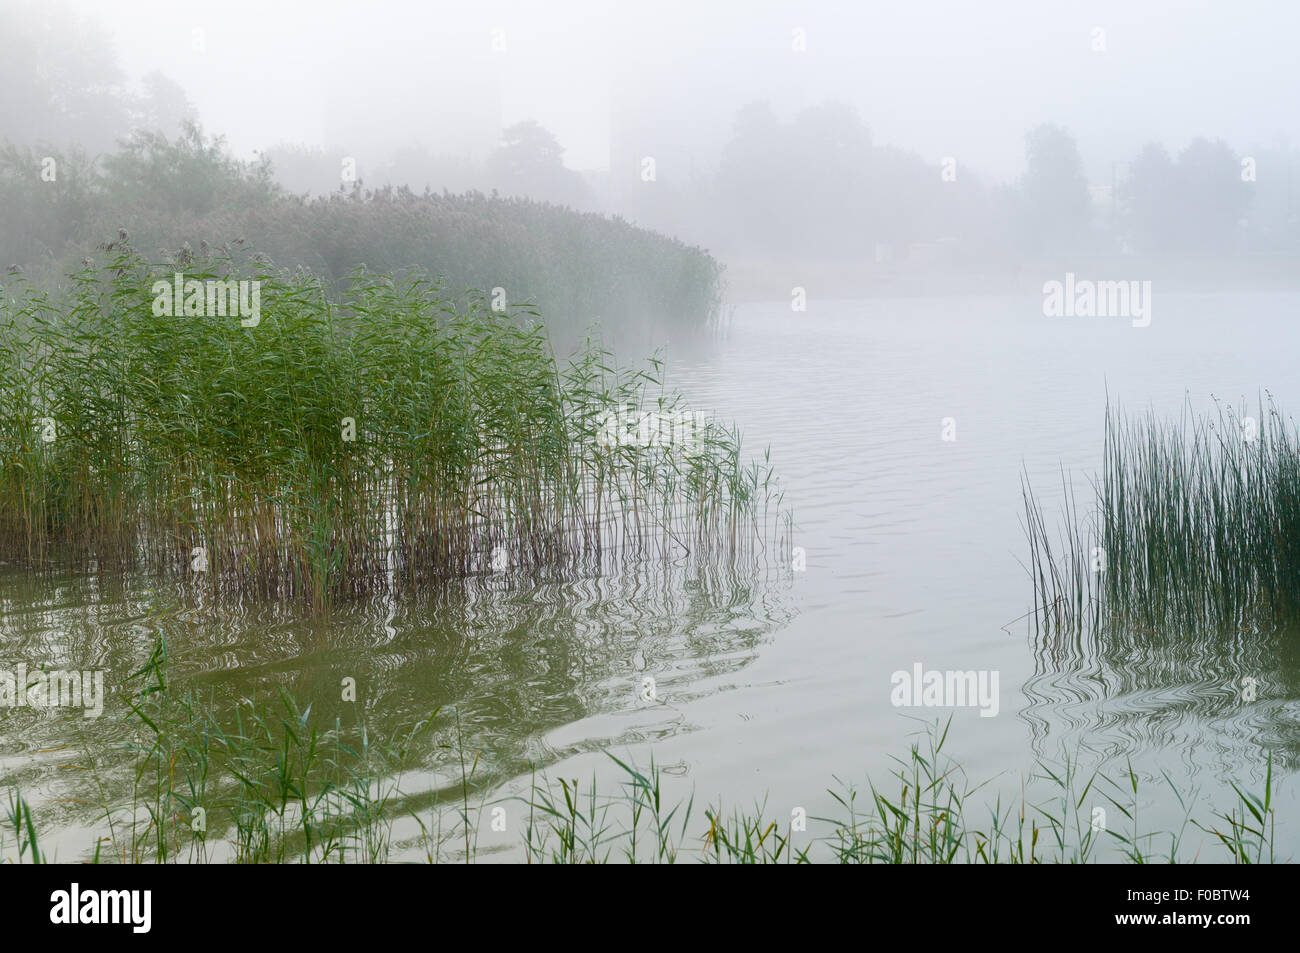 Reed and sedge thicket on the lake, misty morning background Stock Photo